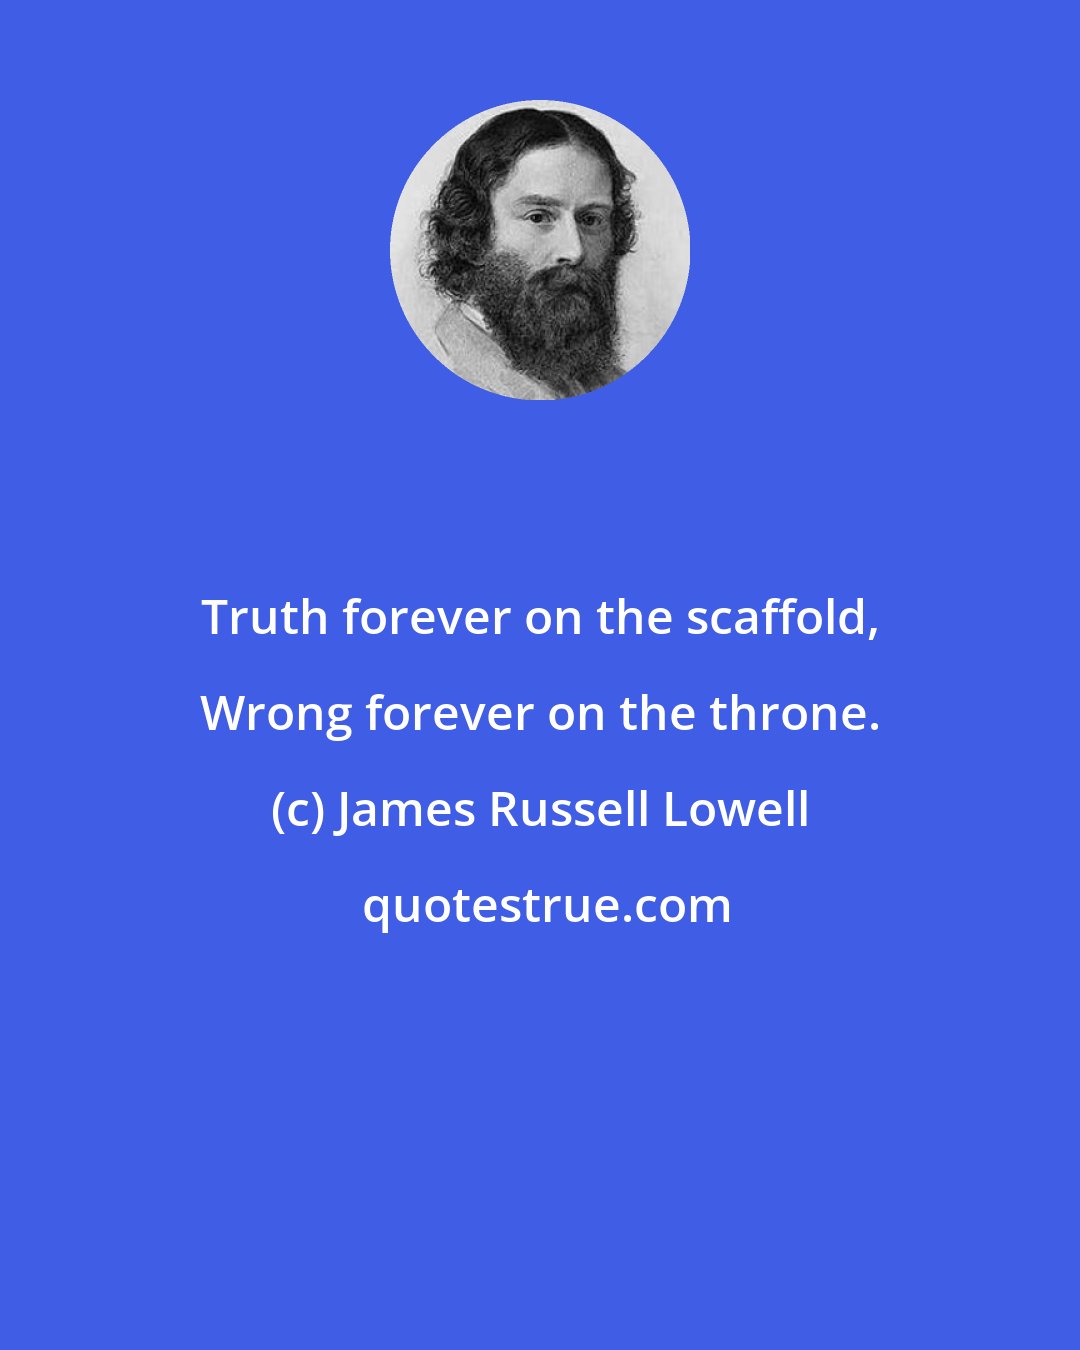 James Russell Lowell: Truth forever on the scaffold, Wrong forever on the throne.